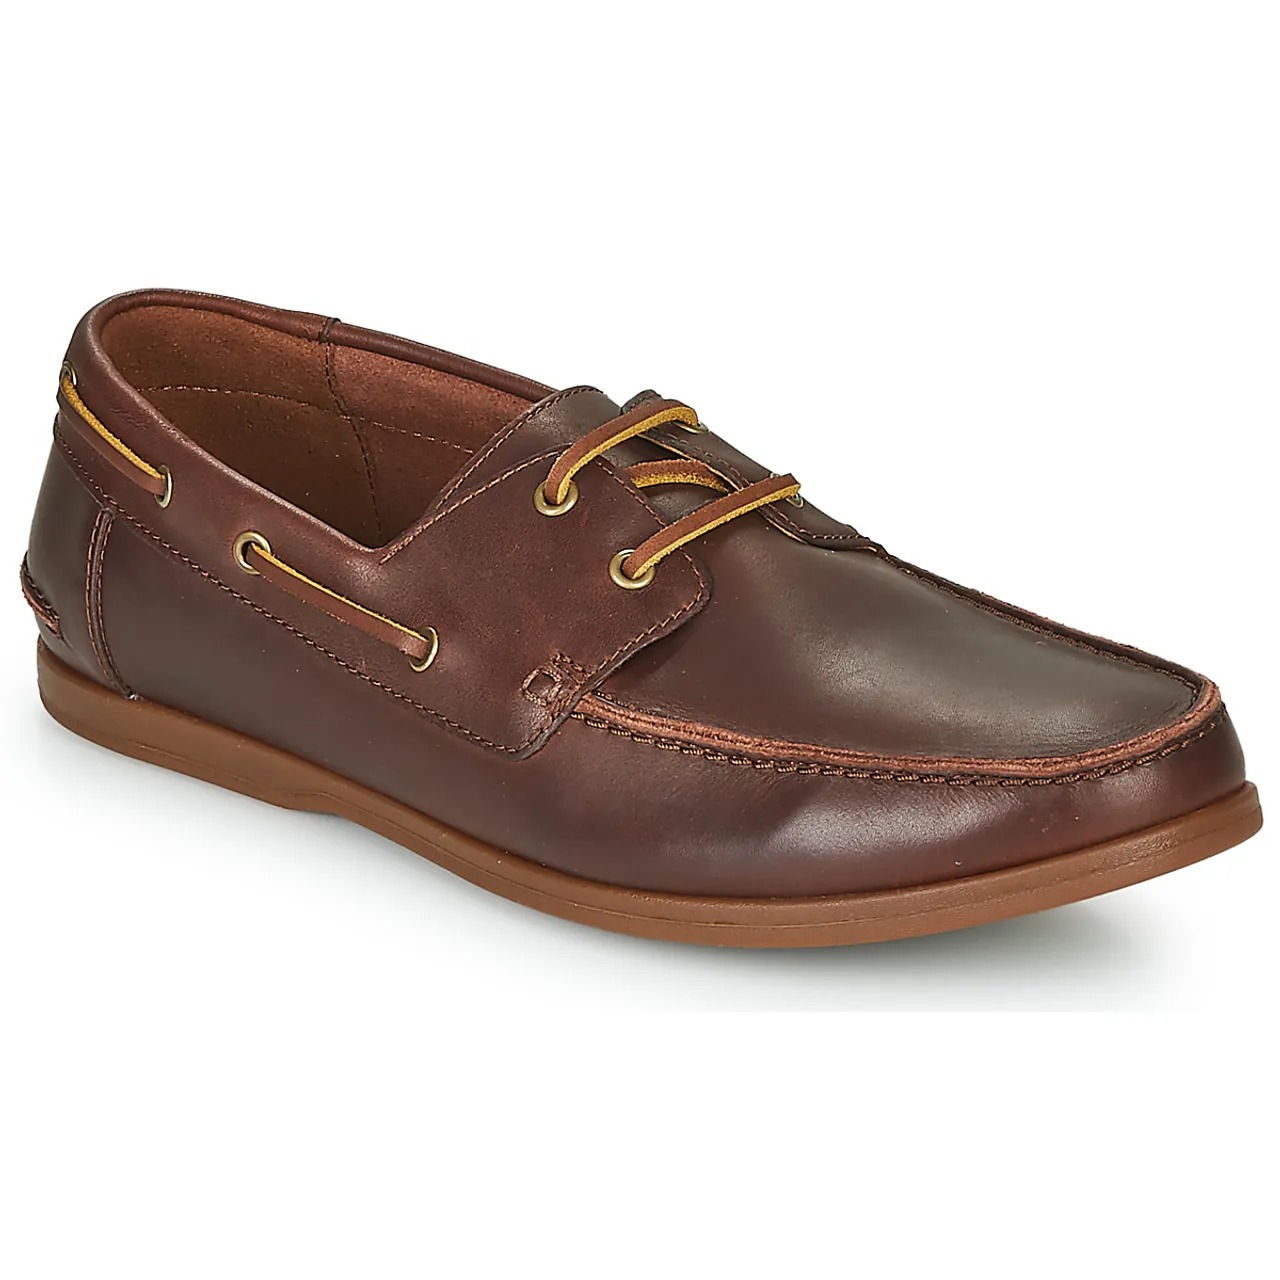 Clarks  PICKWELL SAIL  men's Boat Shoes in Brown